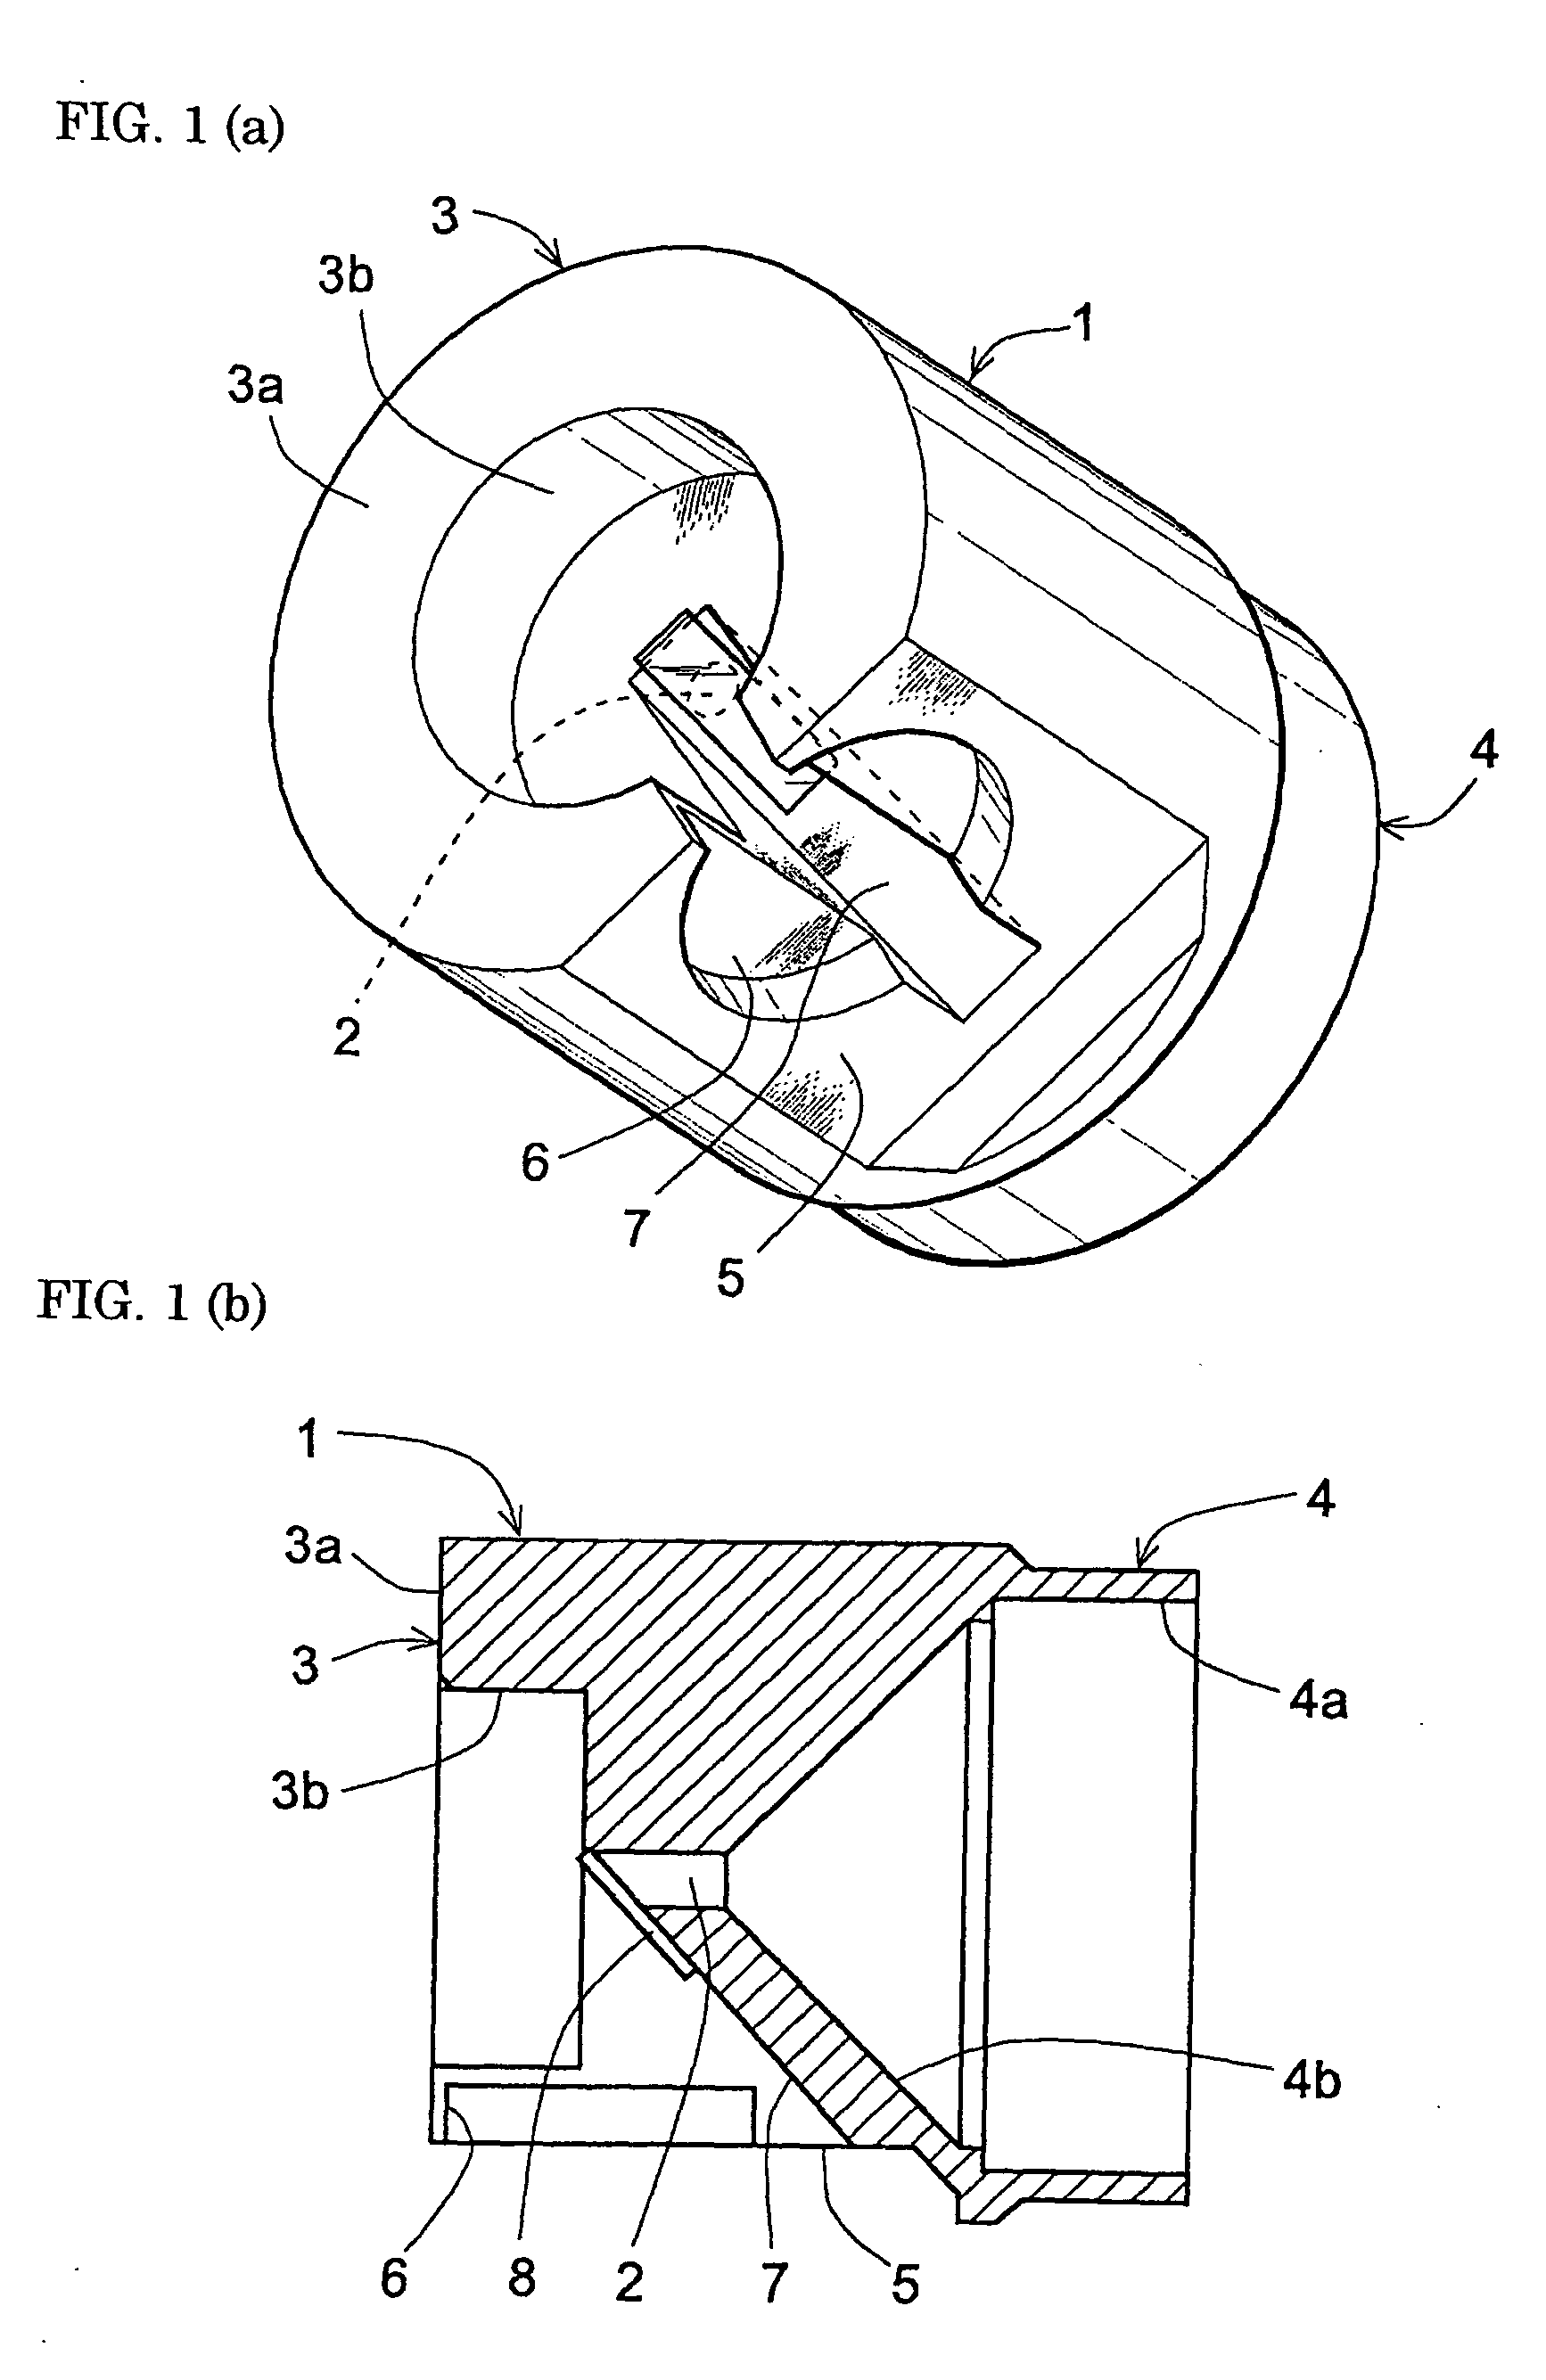 Jointing holder for optical module for single-fiber bidirectional communication and optical module incorporating the jointing holder